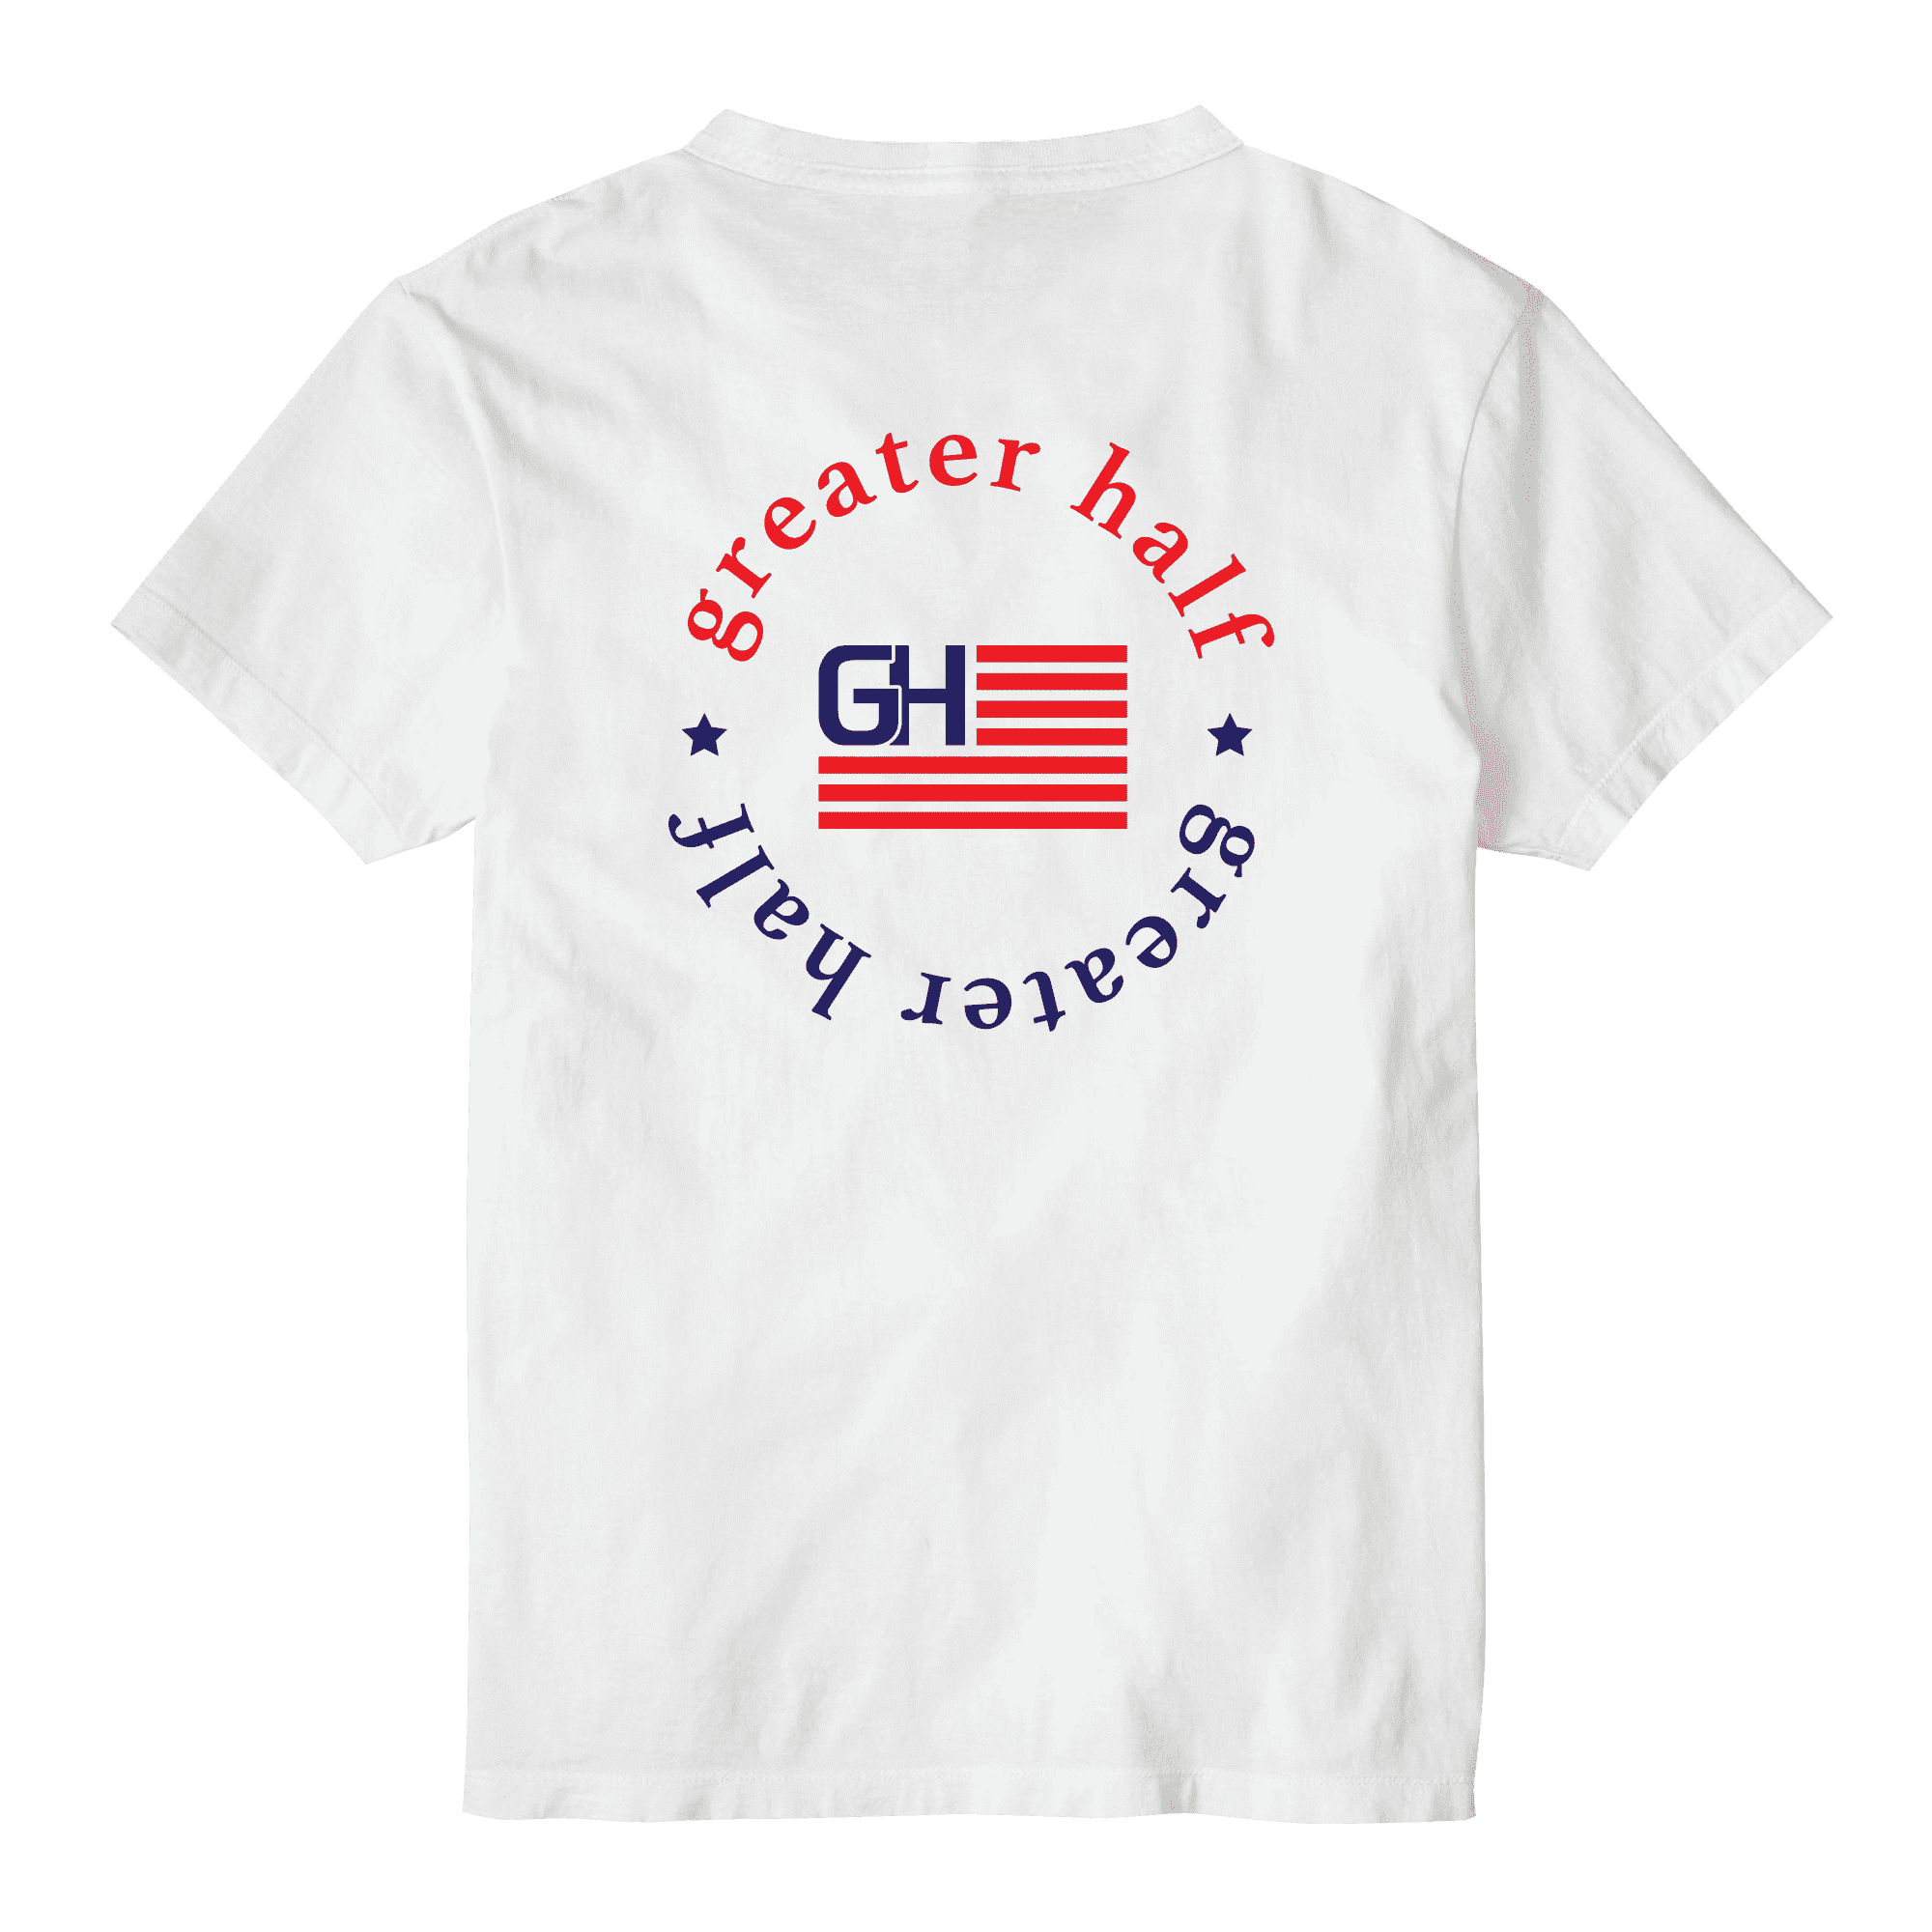 Thumbnail for Greater Half Vintage United Logo T-Shirt - Greater Half